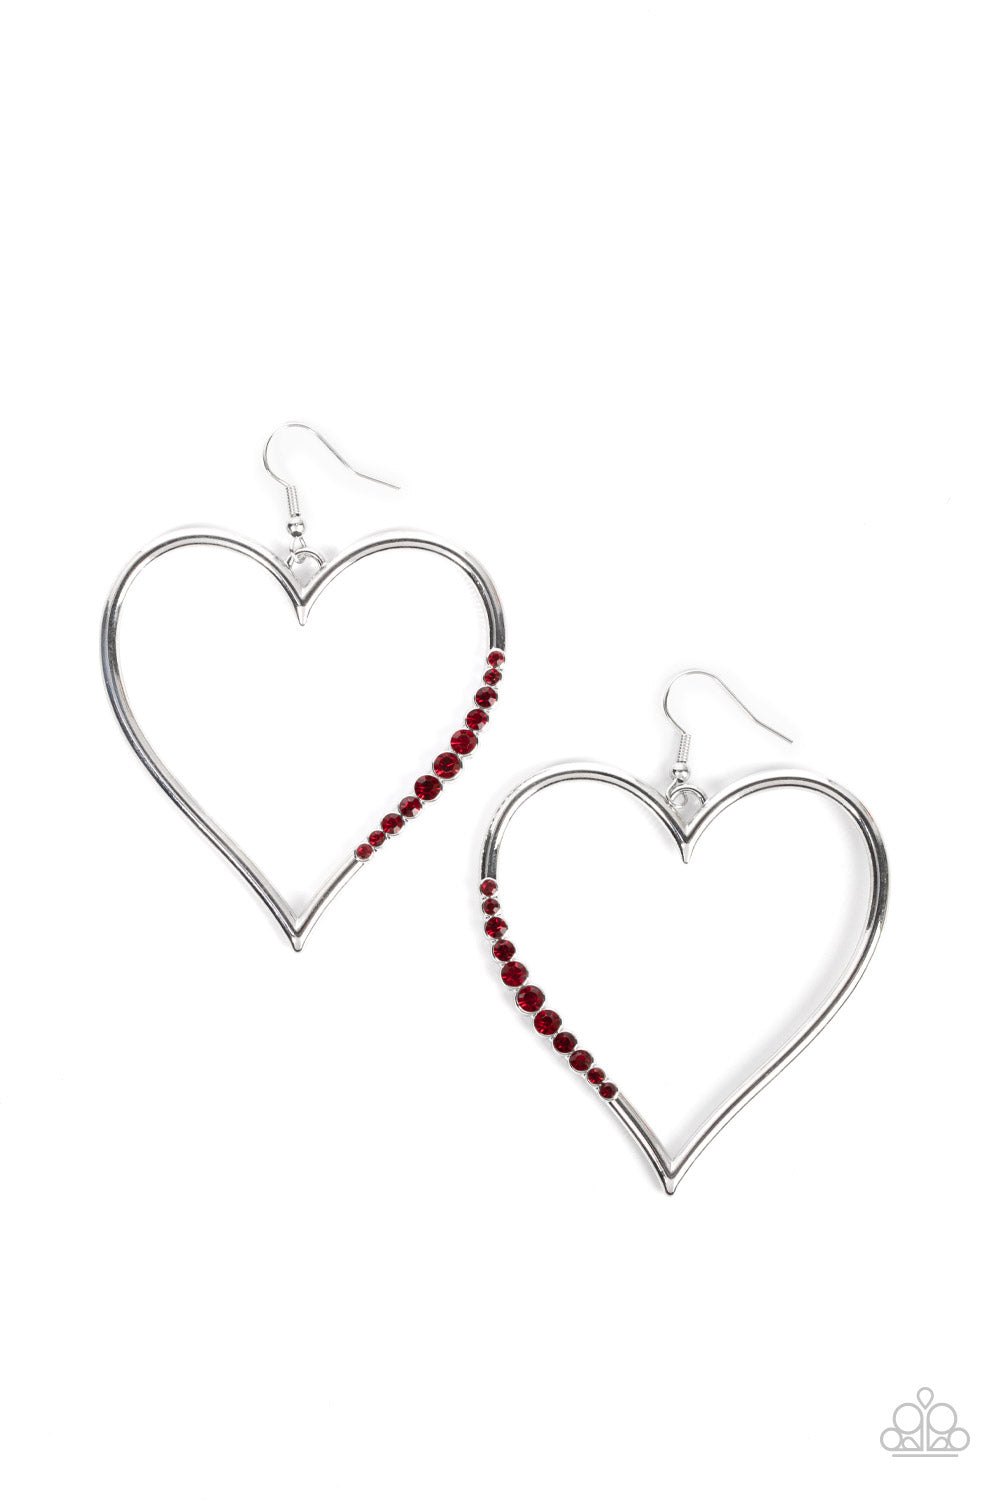 Bewitched Kiss - Red Earrings - Paparazzi Accessories - Paparazzi Accessories 